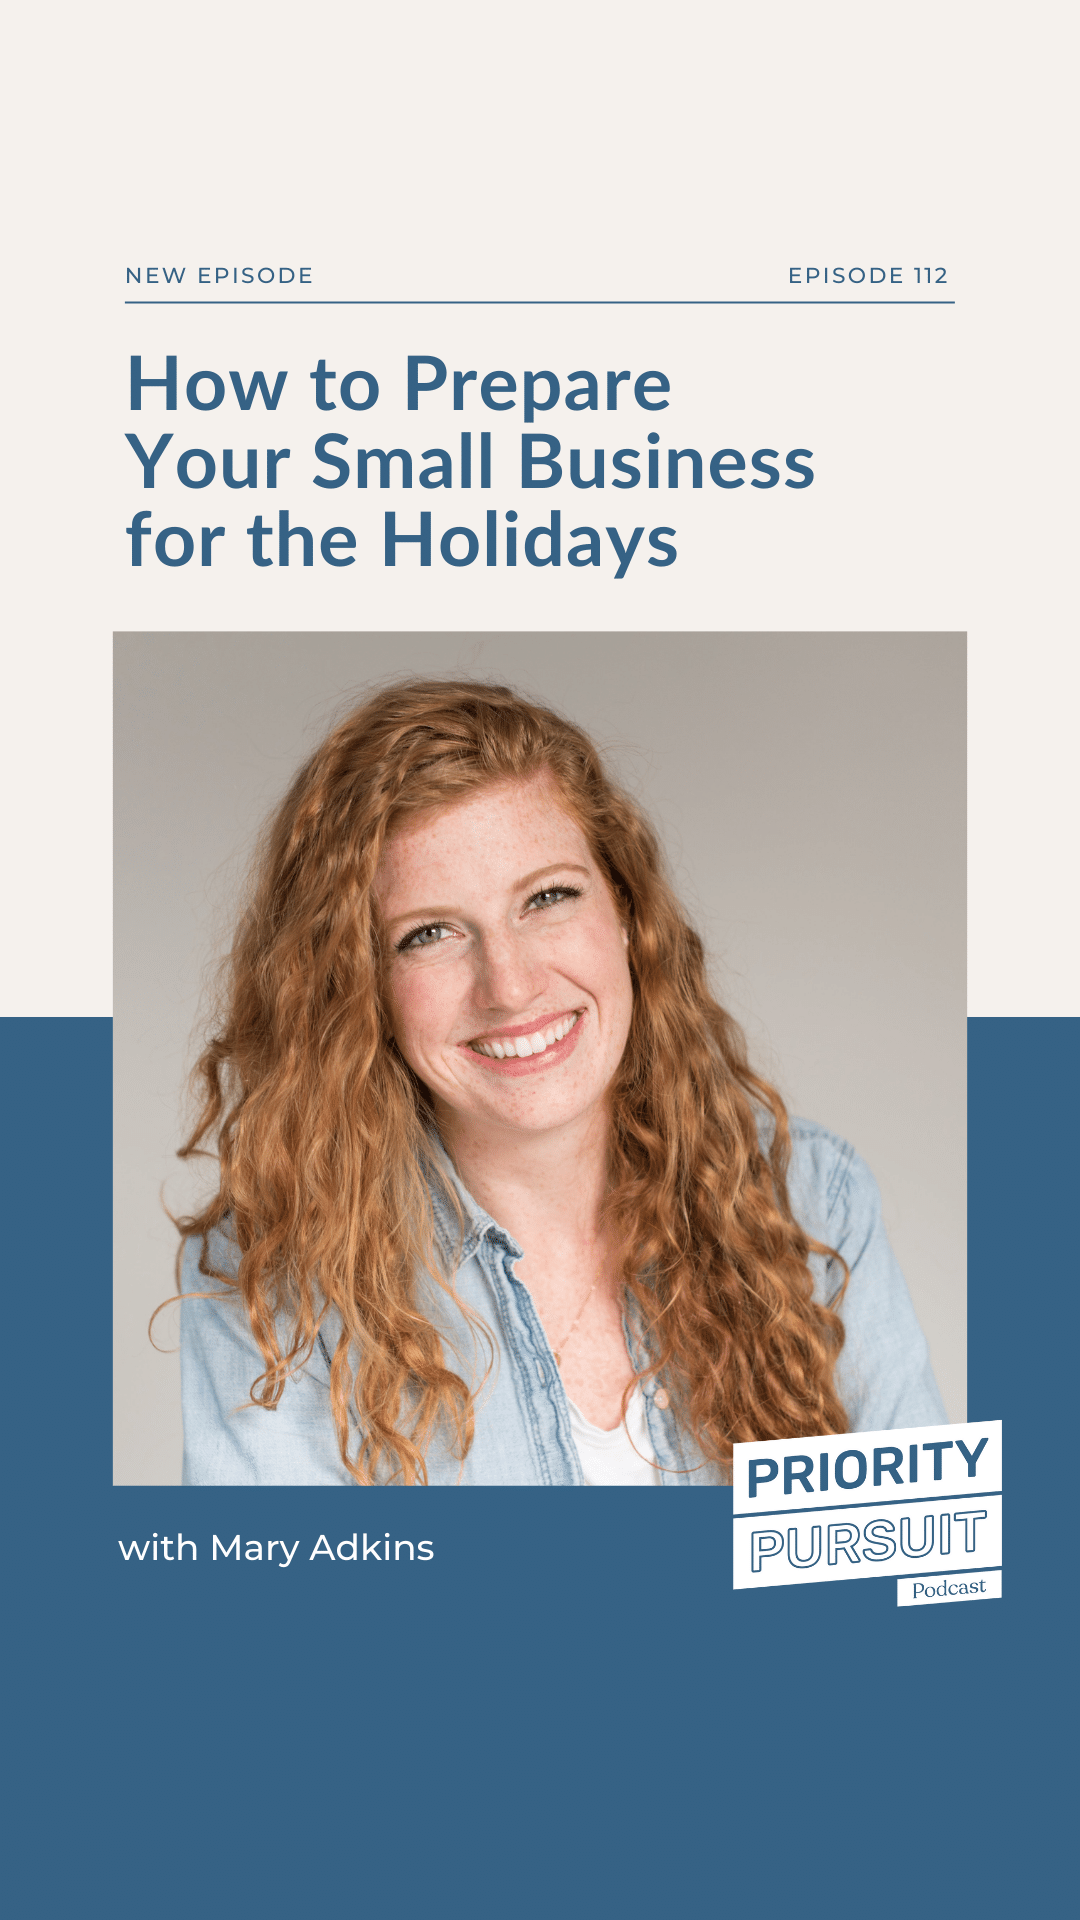 We are joined by Mary Adkins as we discuss how to prepare your small business to take time off during the holidays.